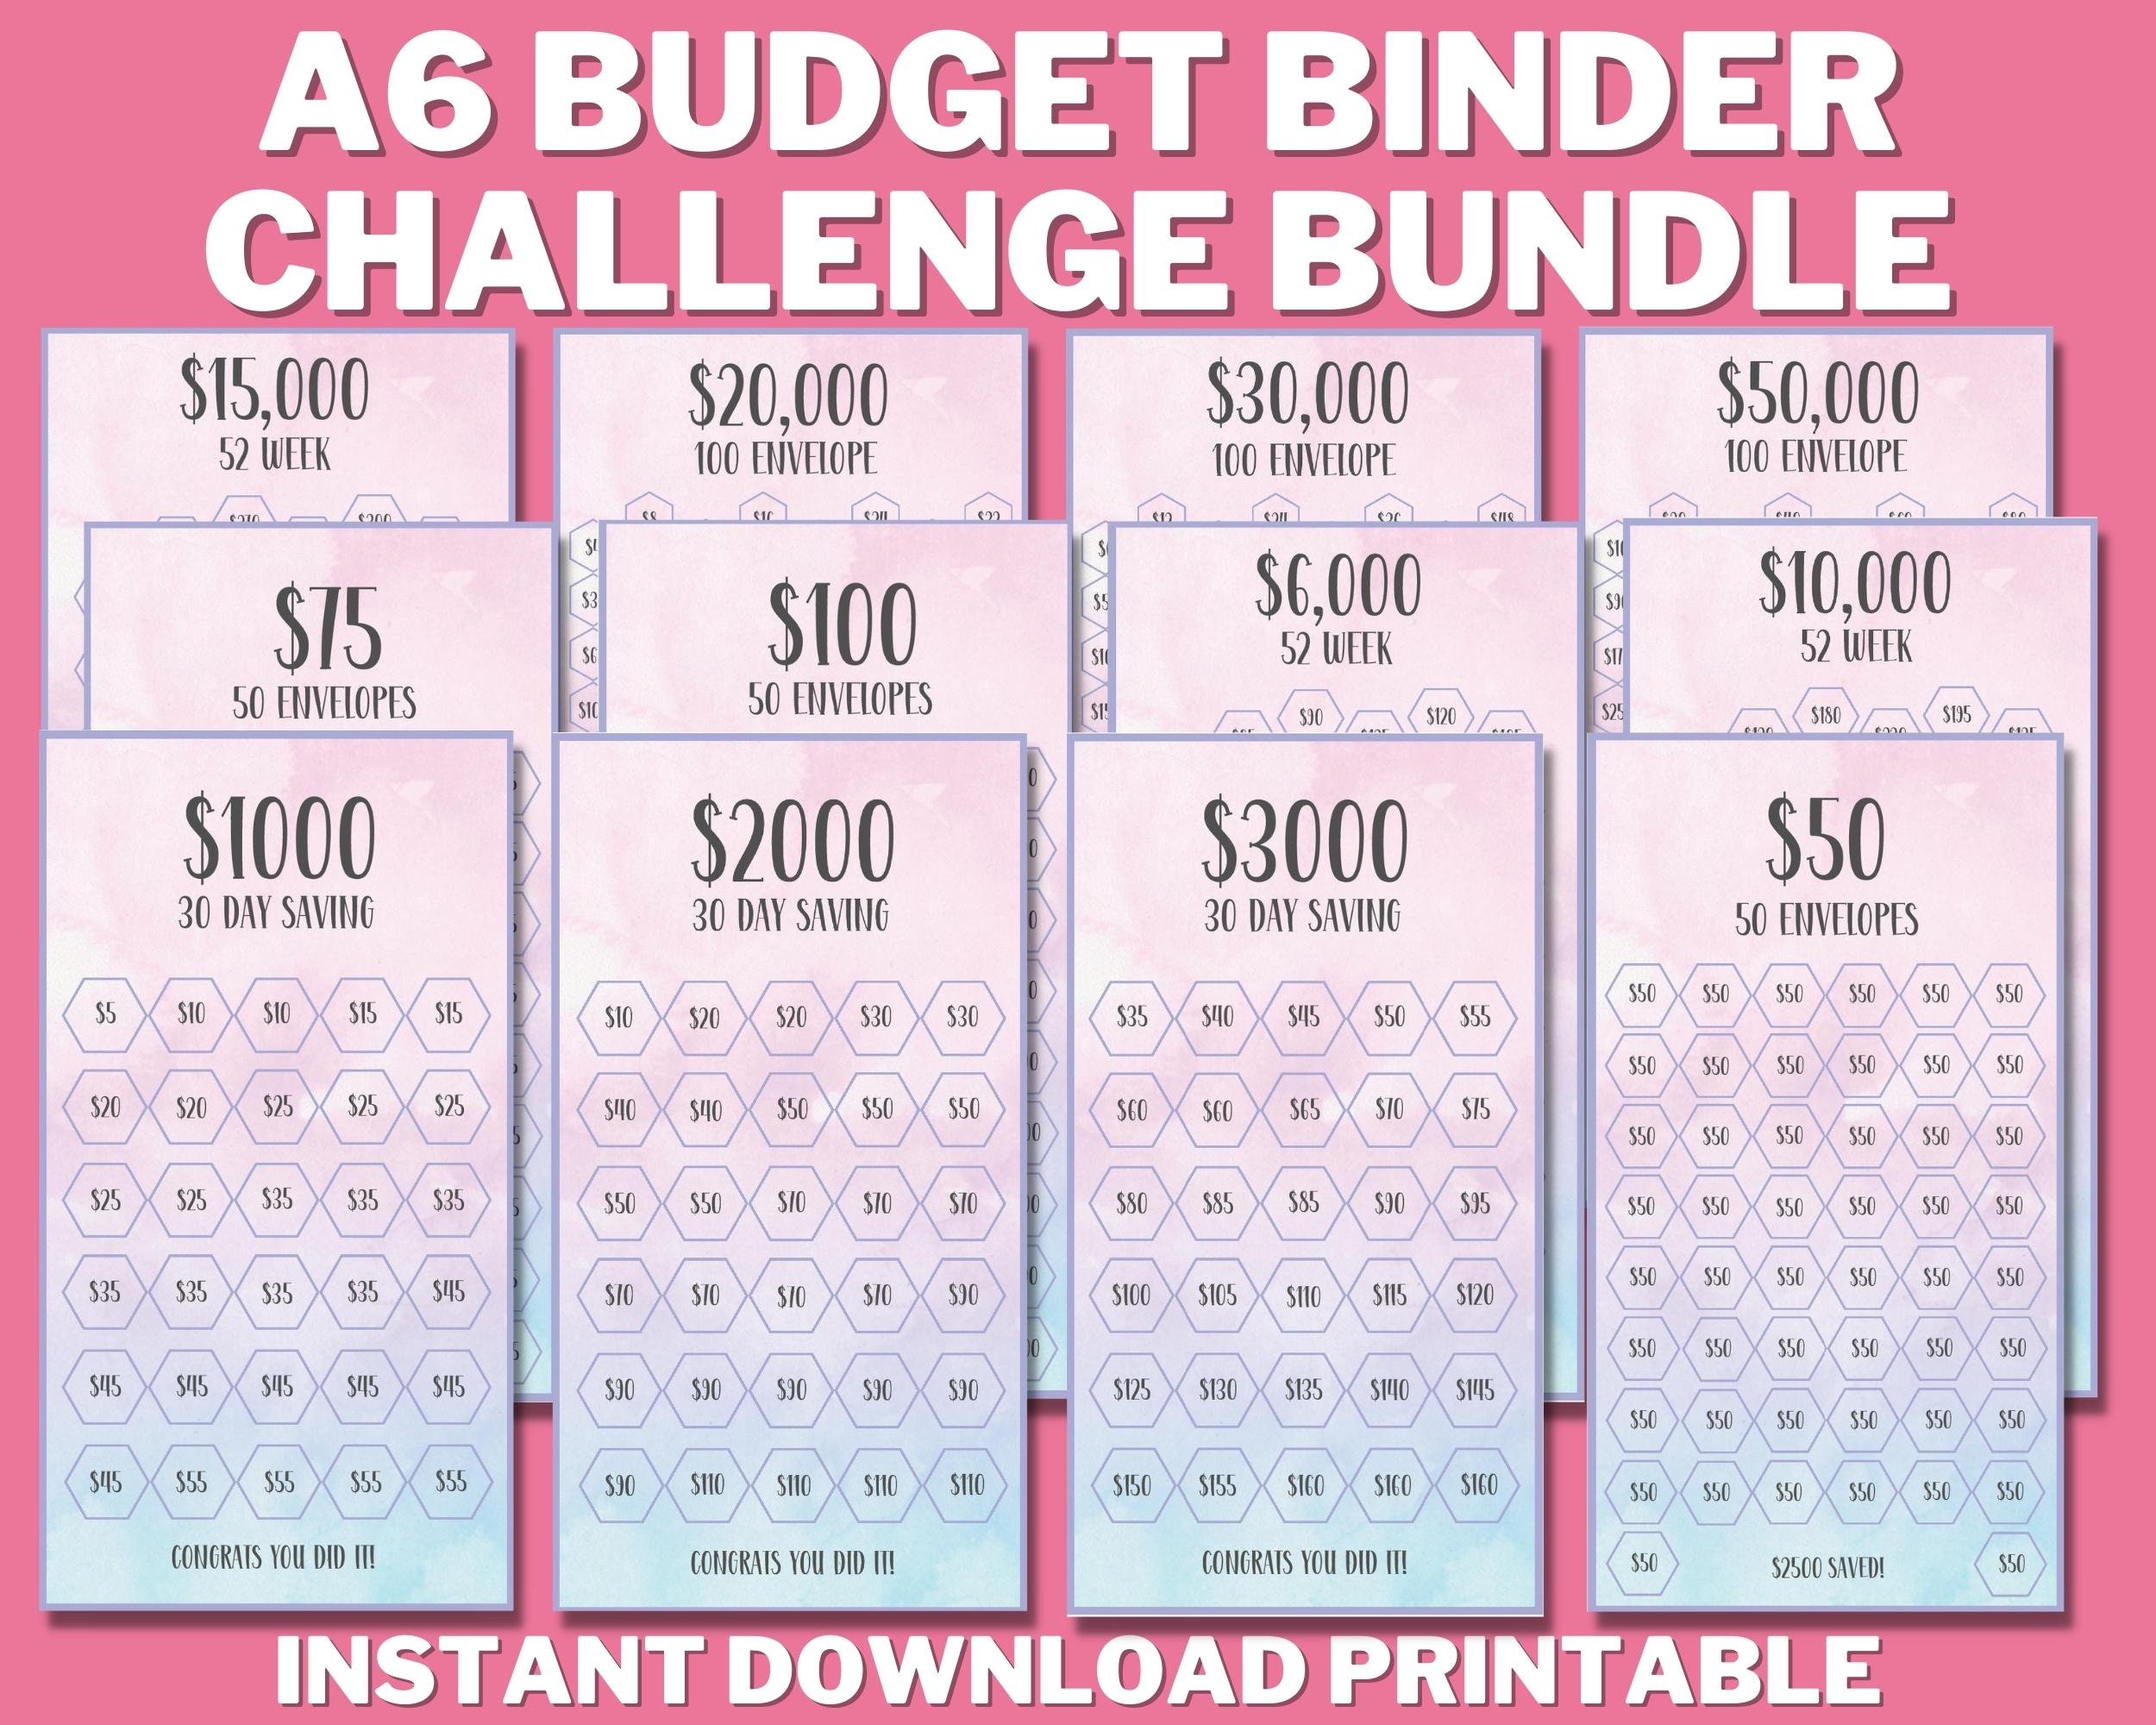 Two-sided cent challenge tracker for A5, A6 laminated and perforated budget  binder or A6 zip envelope format